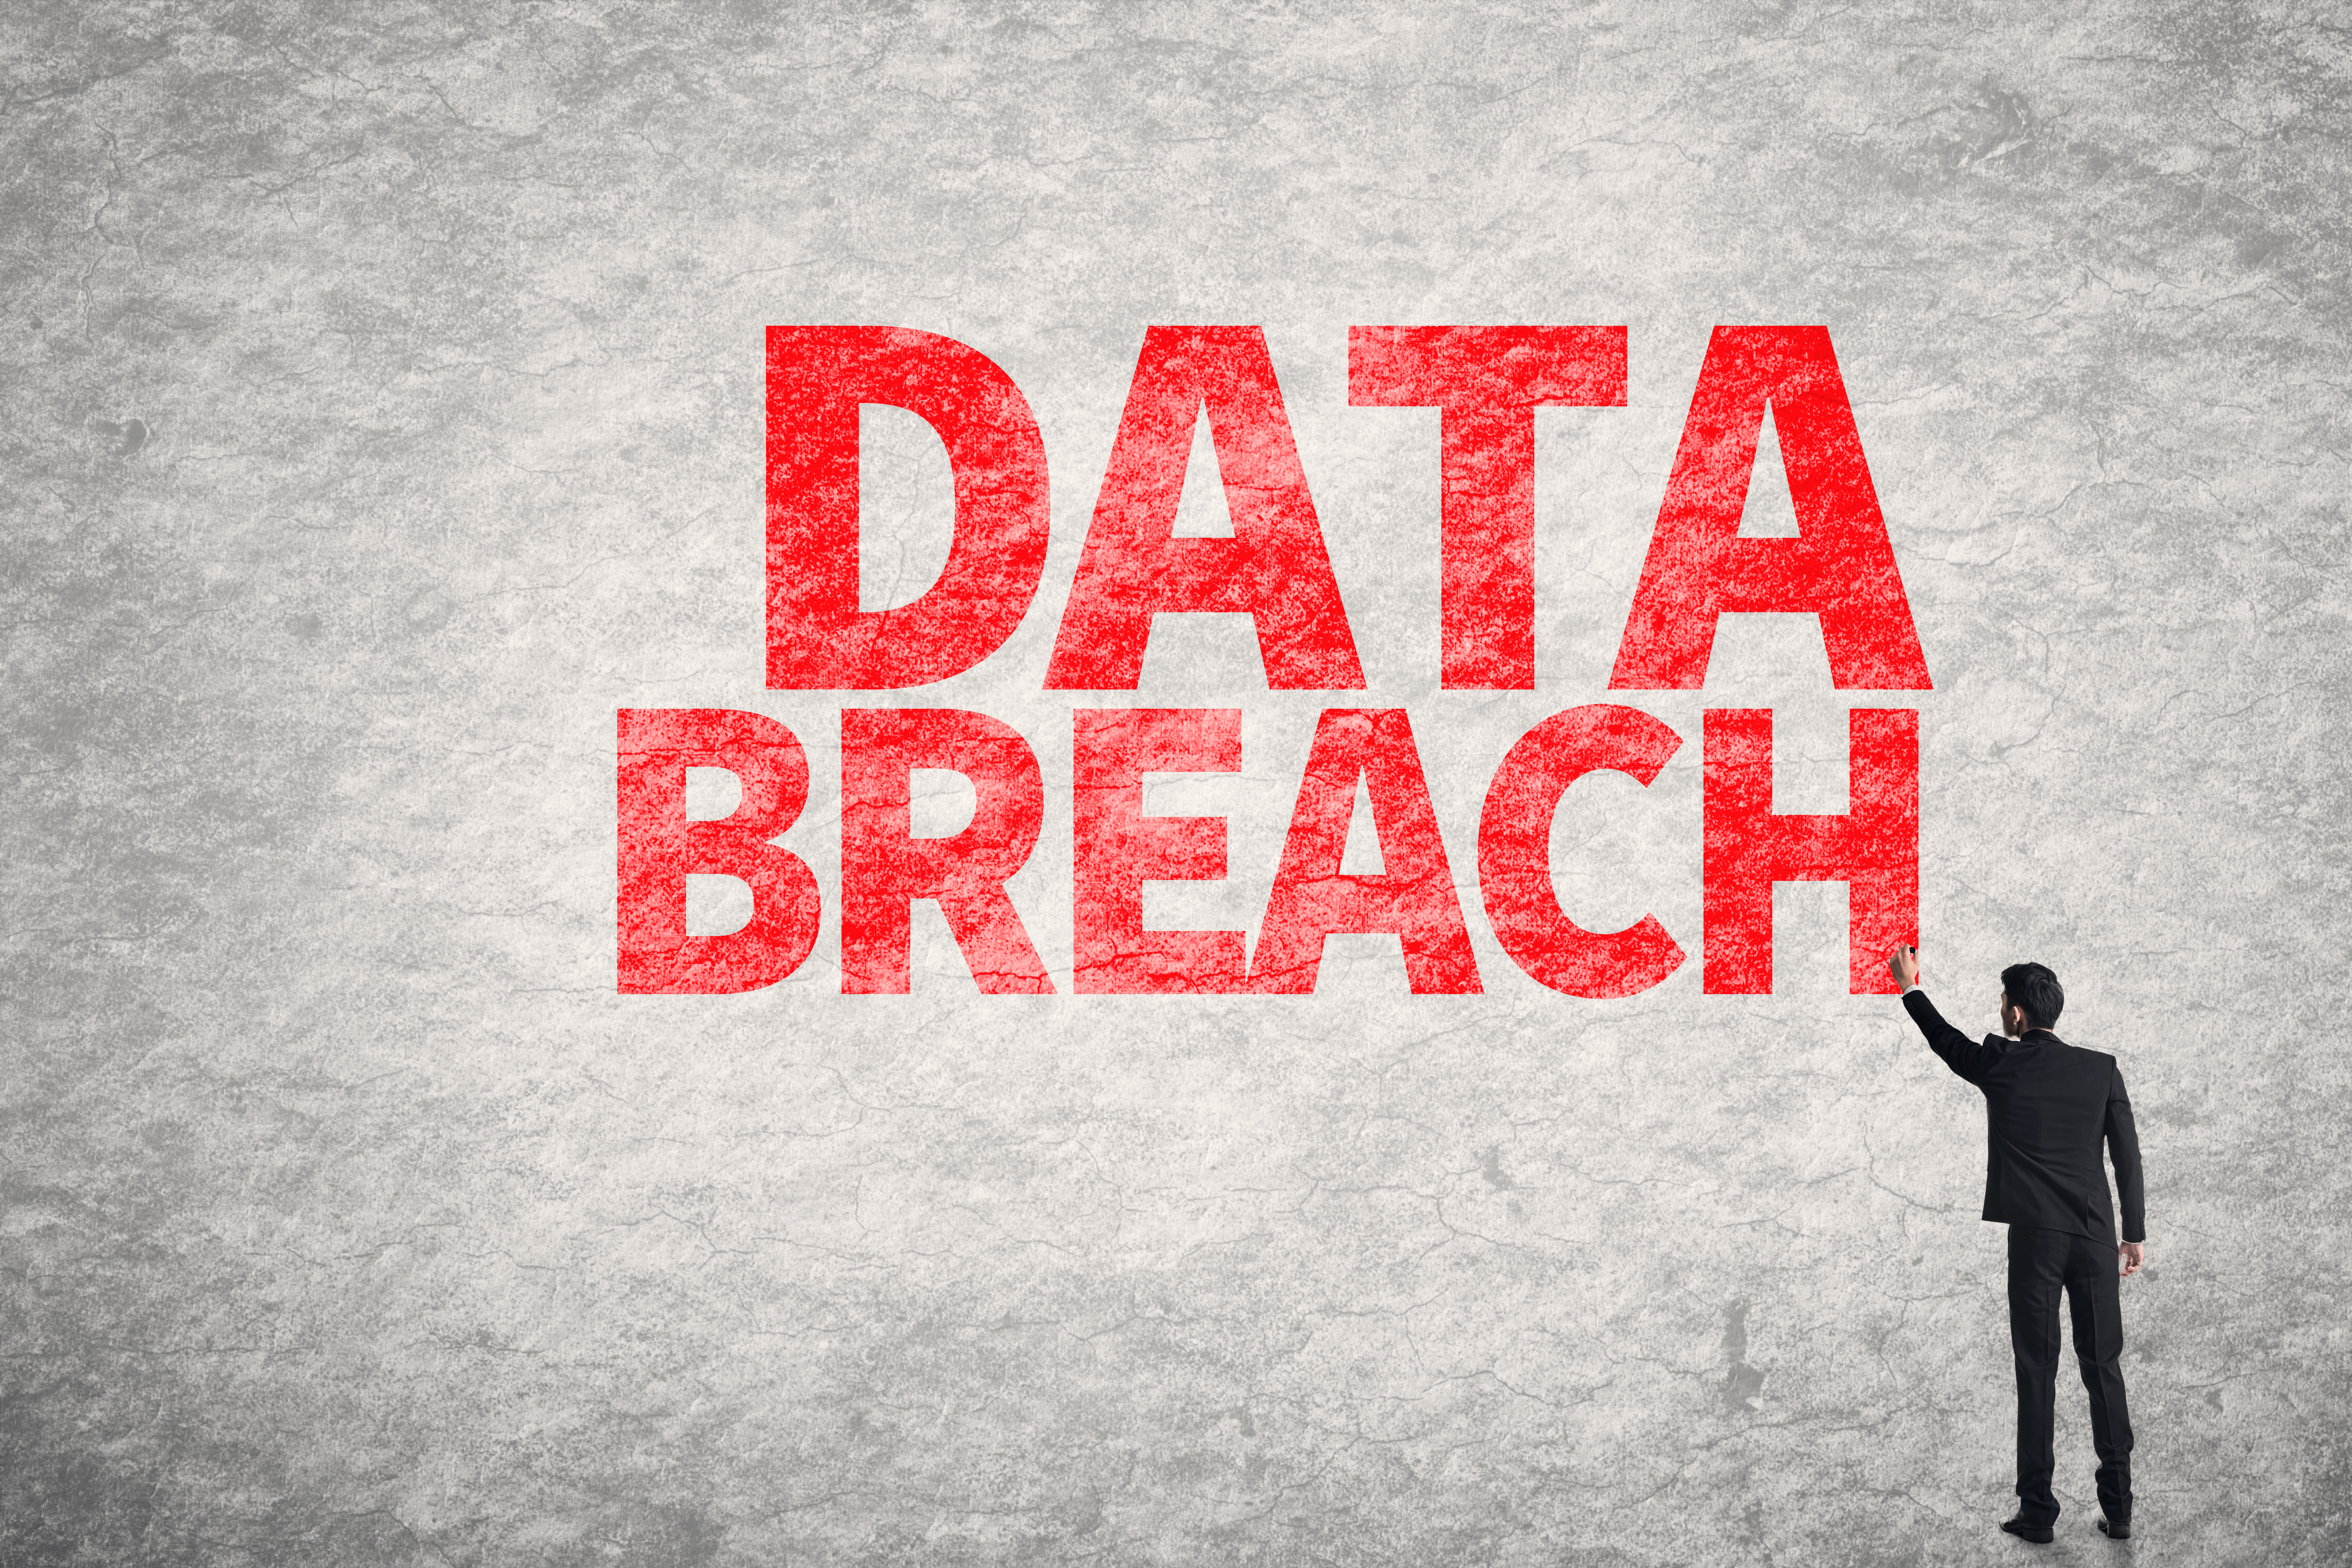 Chili’s Data Breach Exposed: From Crisis to Recovery